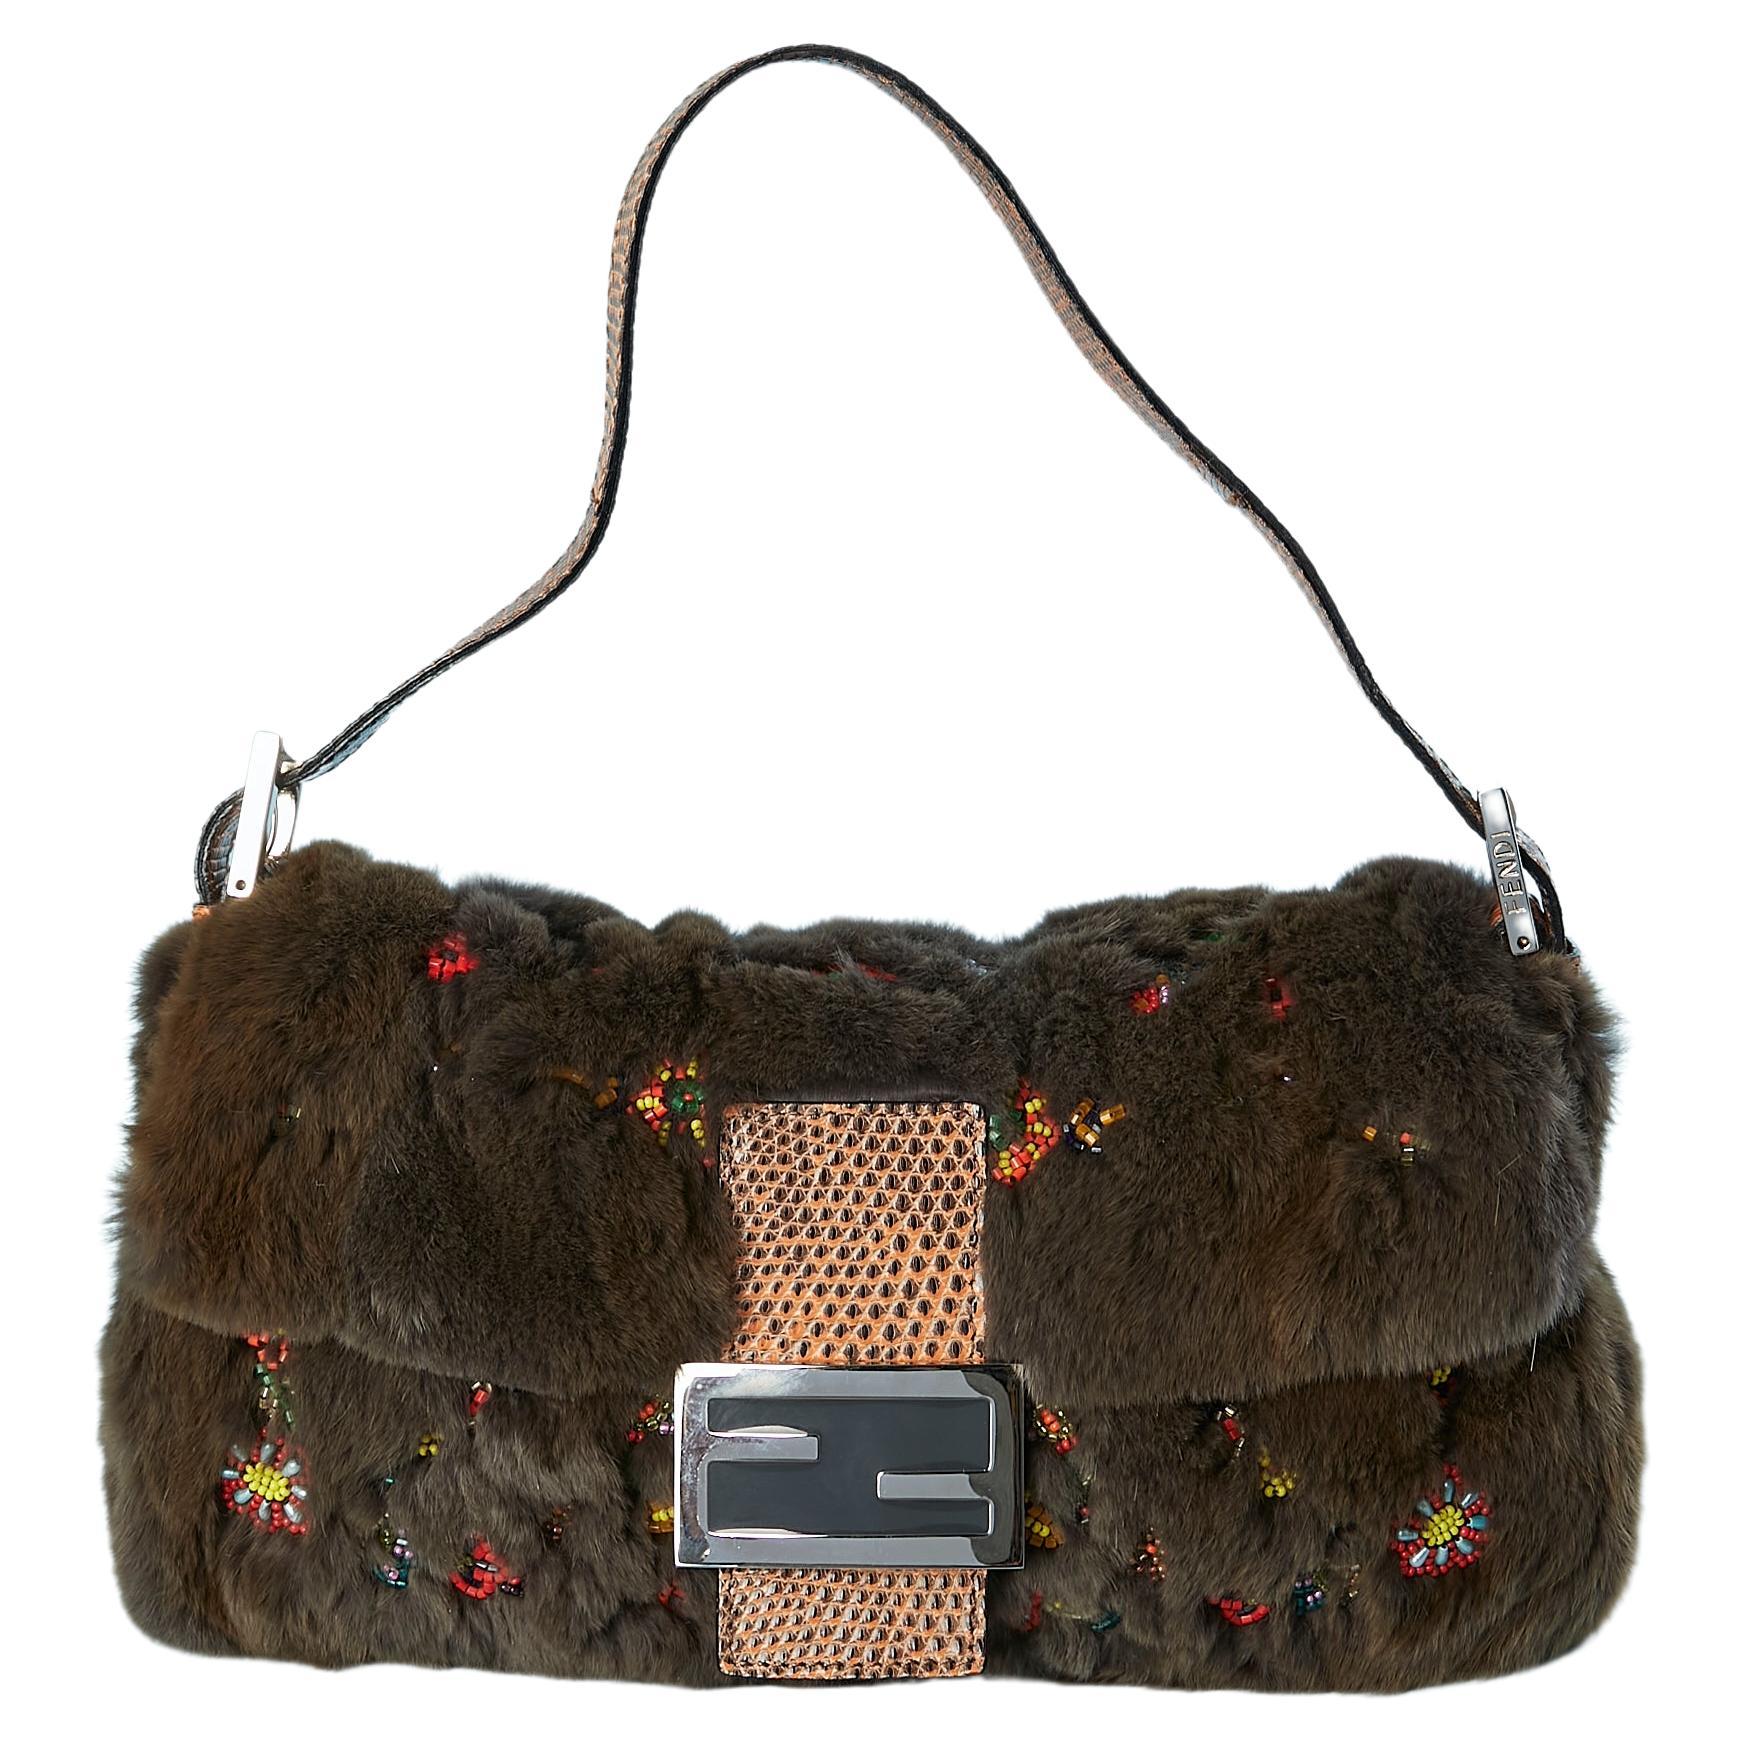 Baguette bag in brown fur, python leather and beads FENDI  For Sale